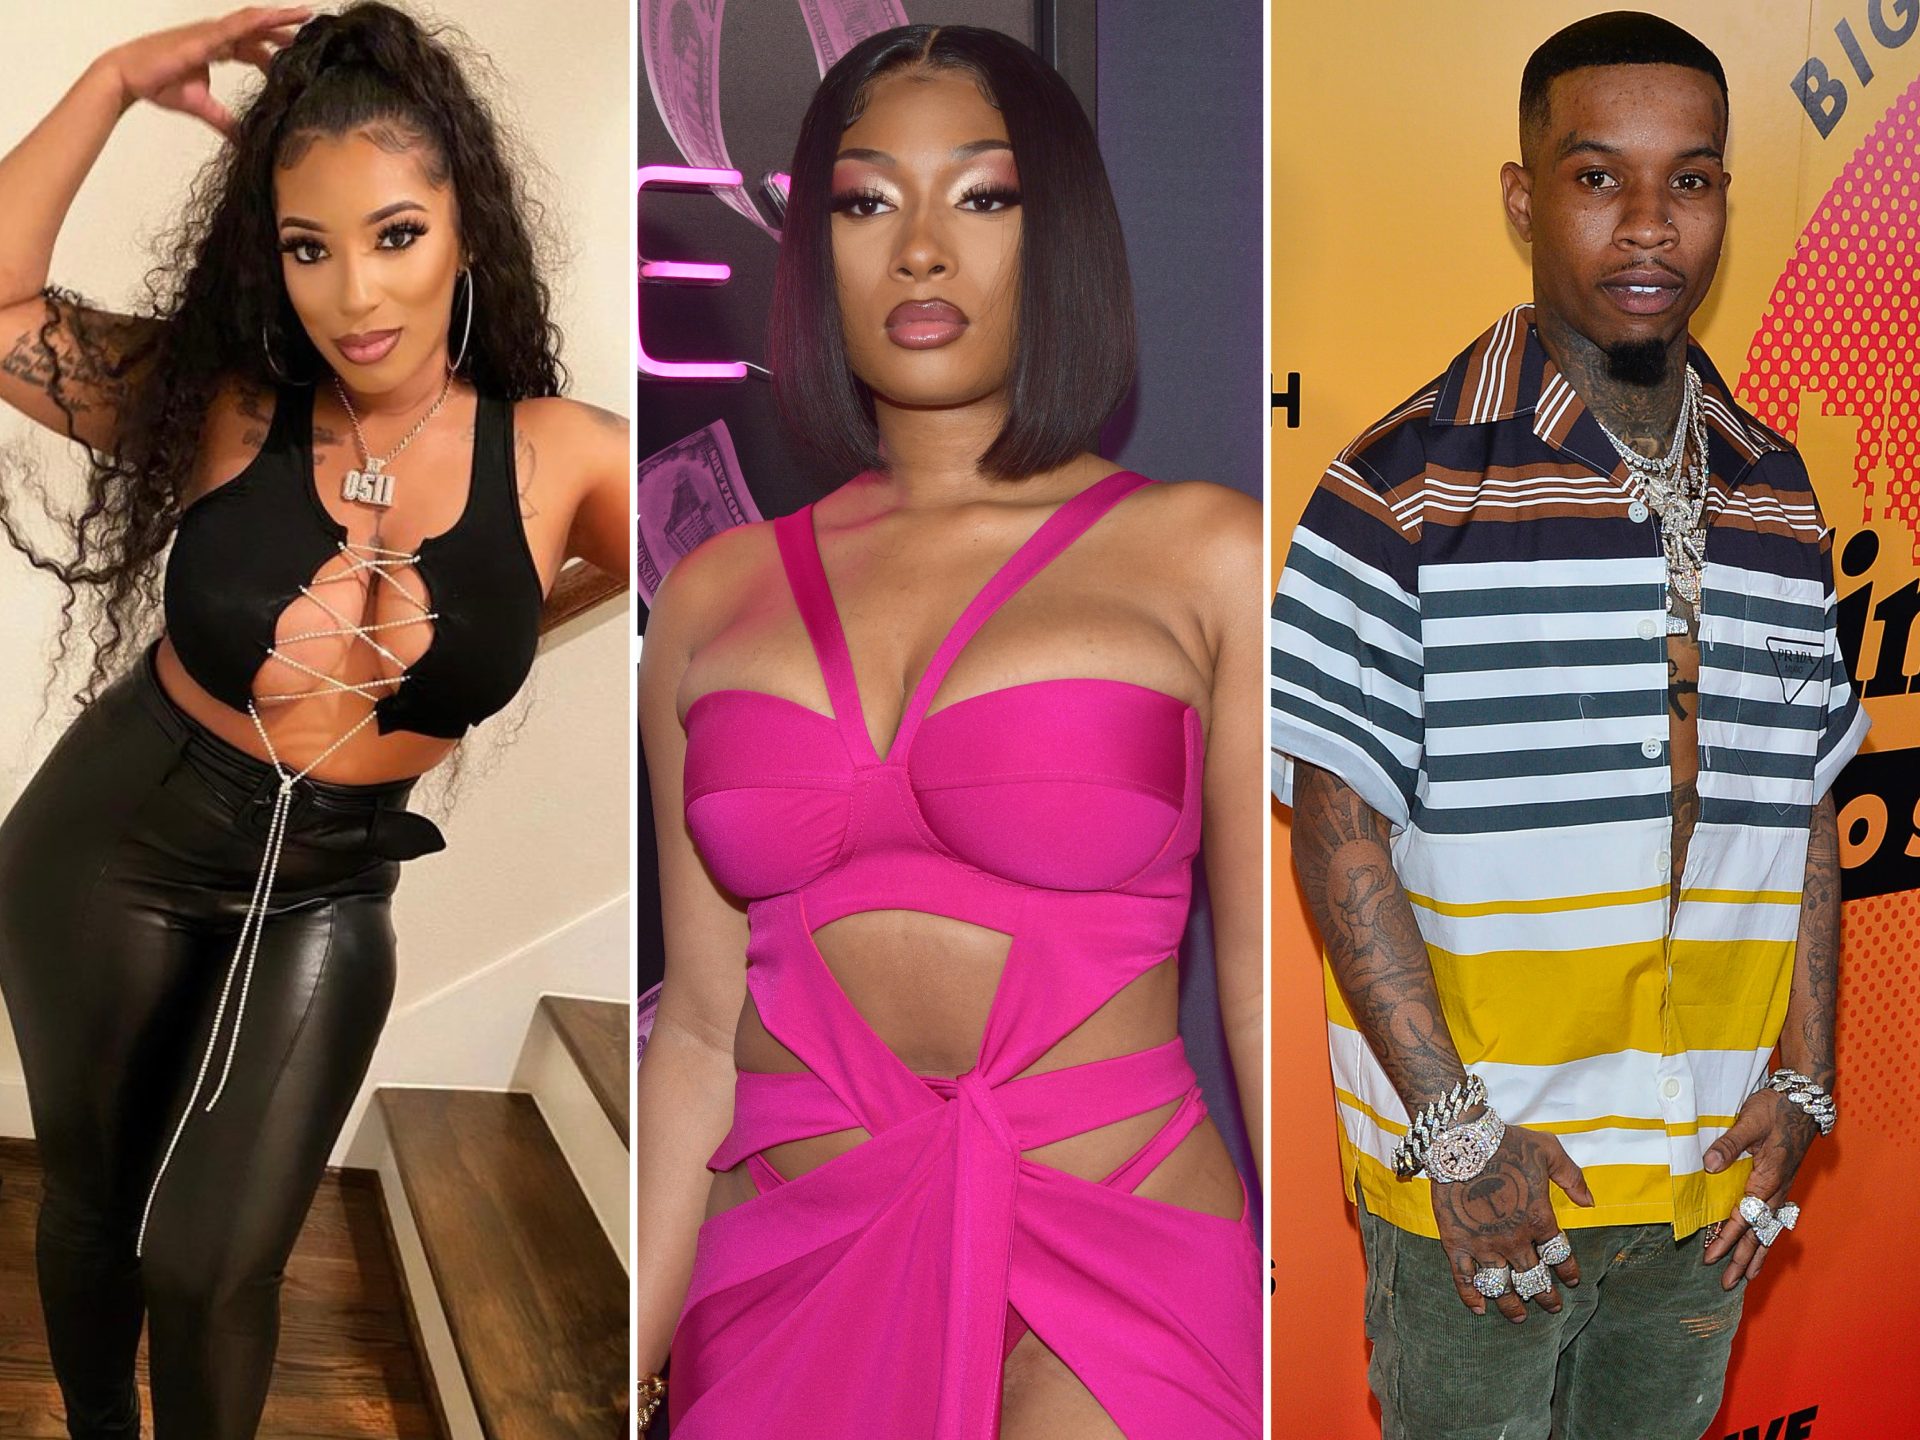 Megan Thee Stallion speaks about the July 2020 shooting where she was shot in both of her feet, and the friendships that ended because of it.